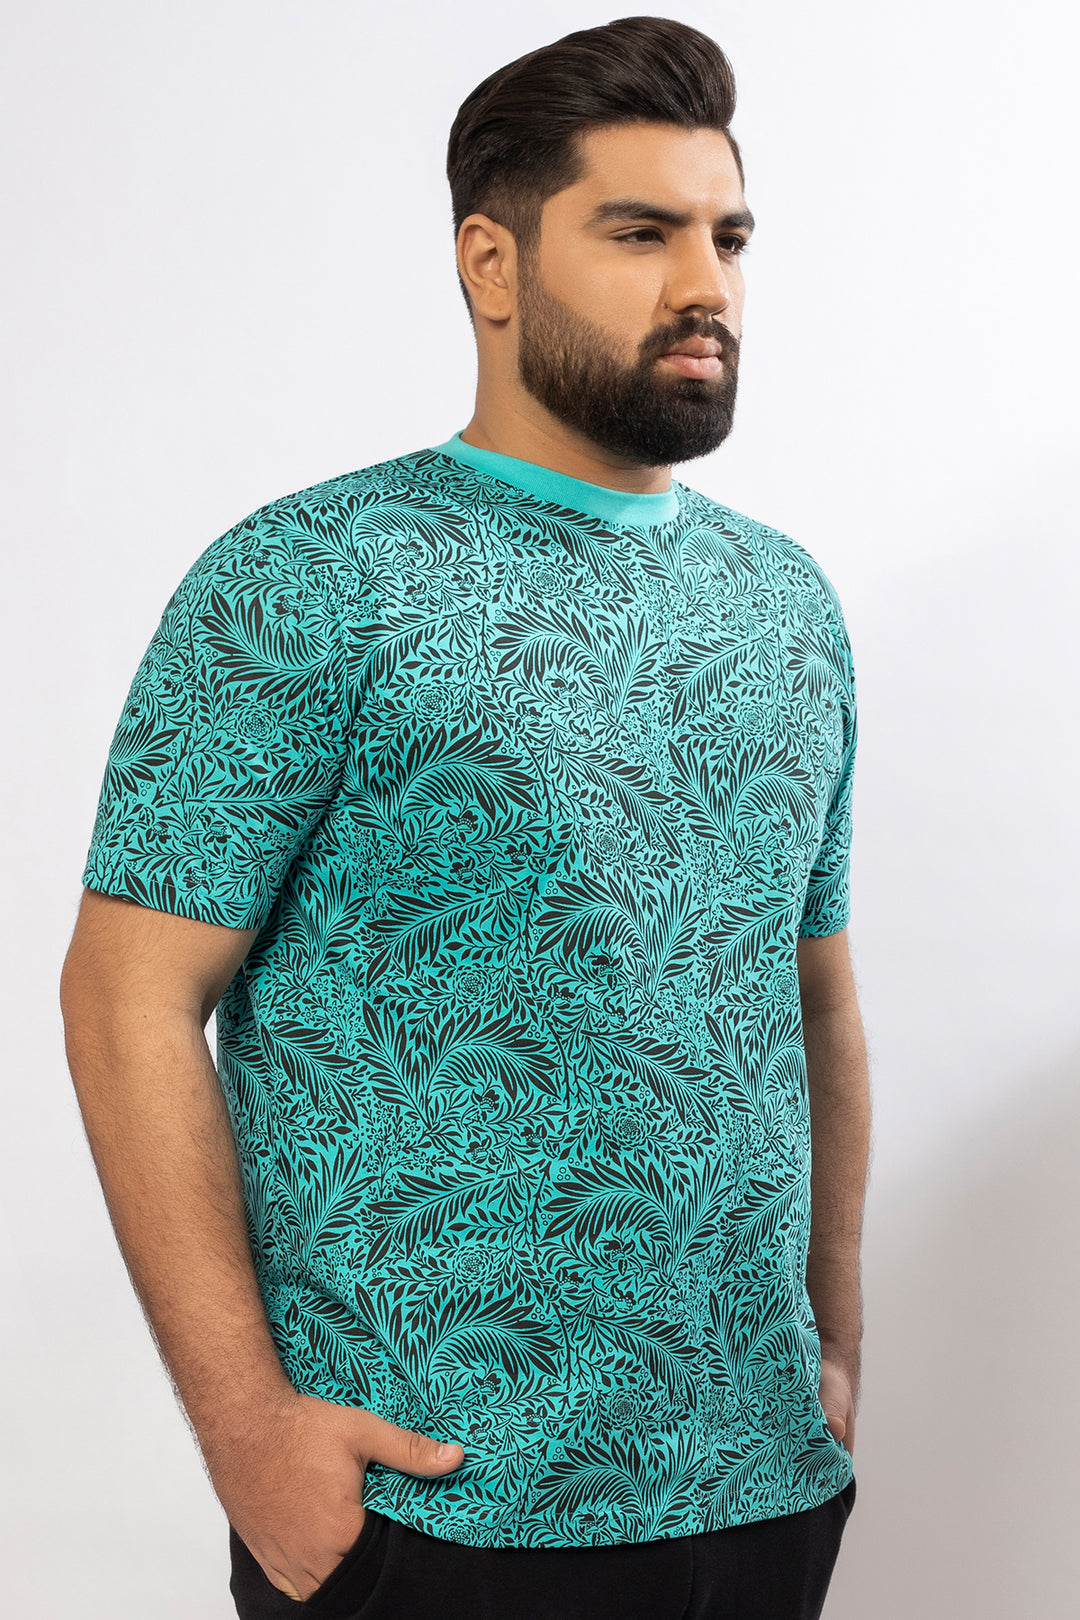 Turquoise Printed T-Shirt (Plus size) - A24 - MT0330P